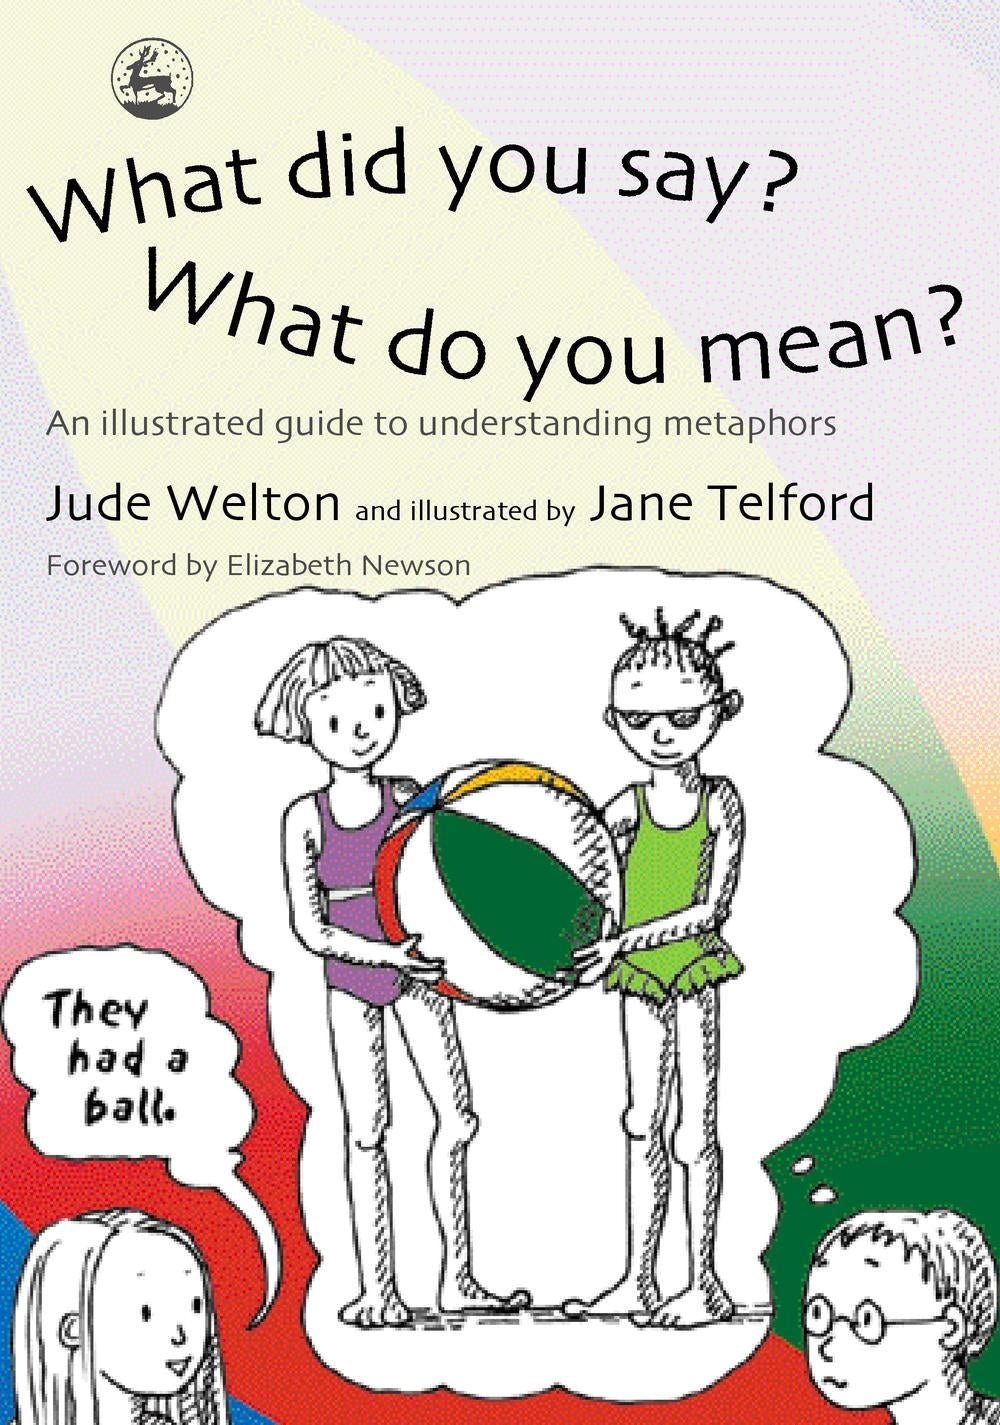 What Did You Say? What Do You Mean? by Jane Telford, Jude Welton